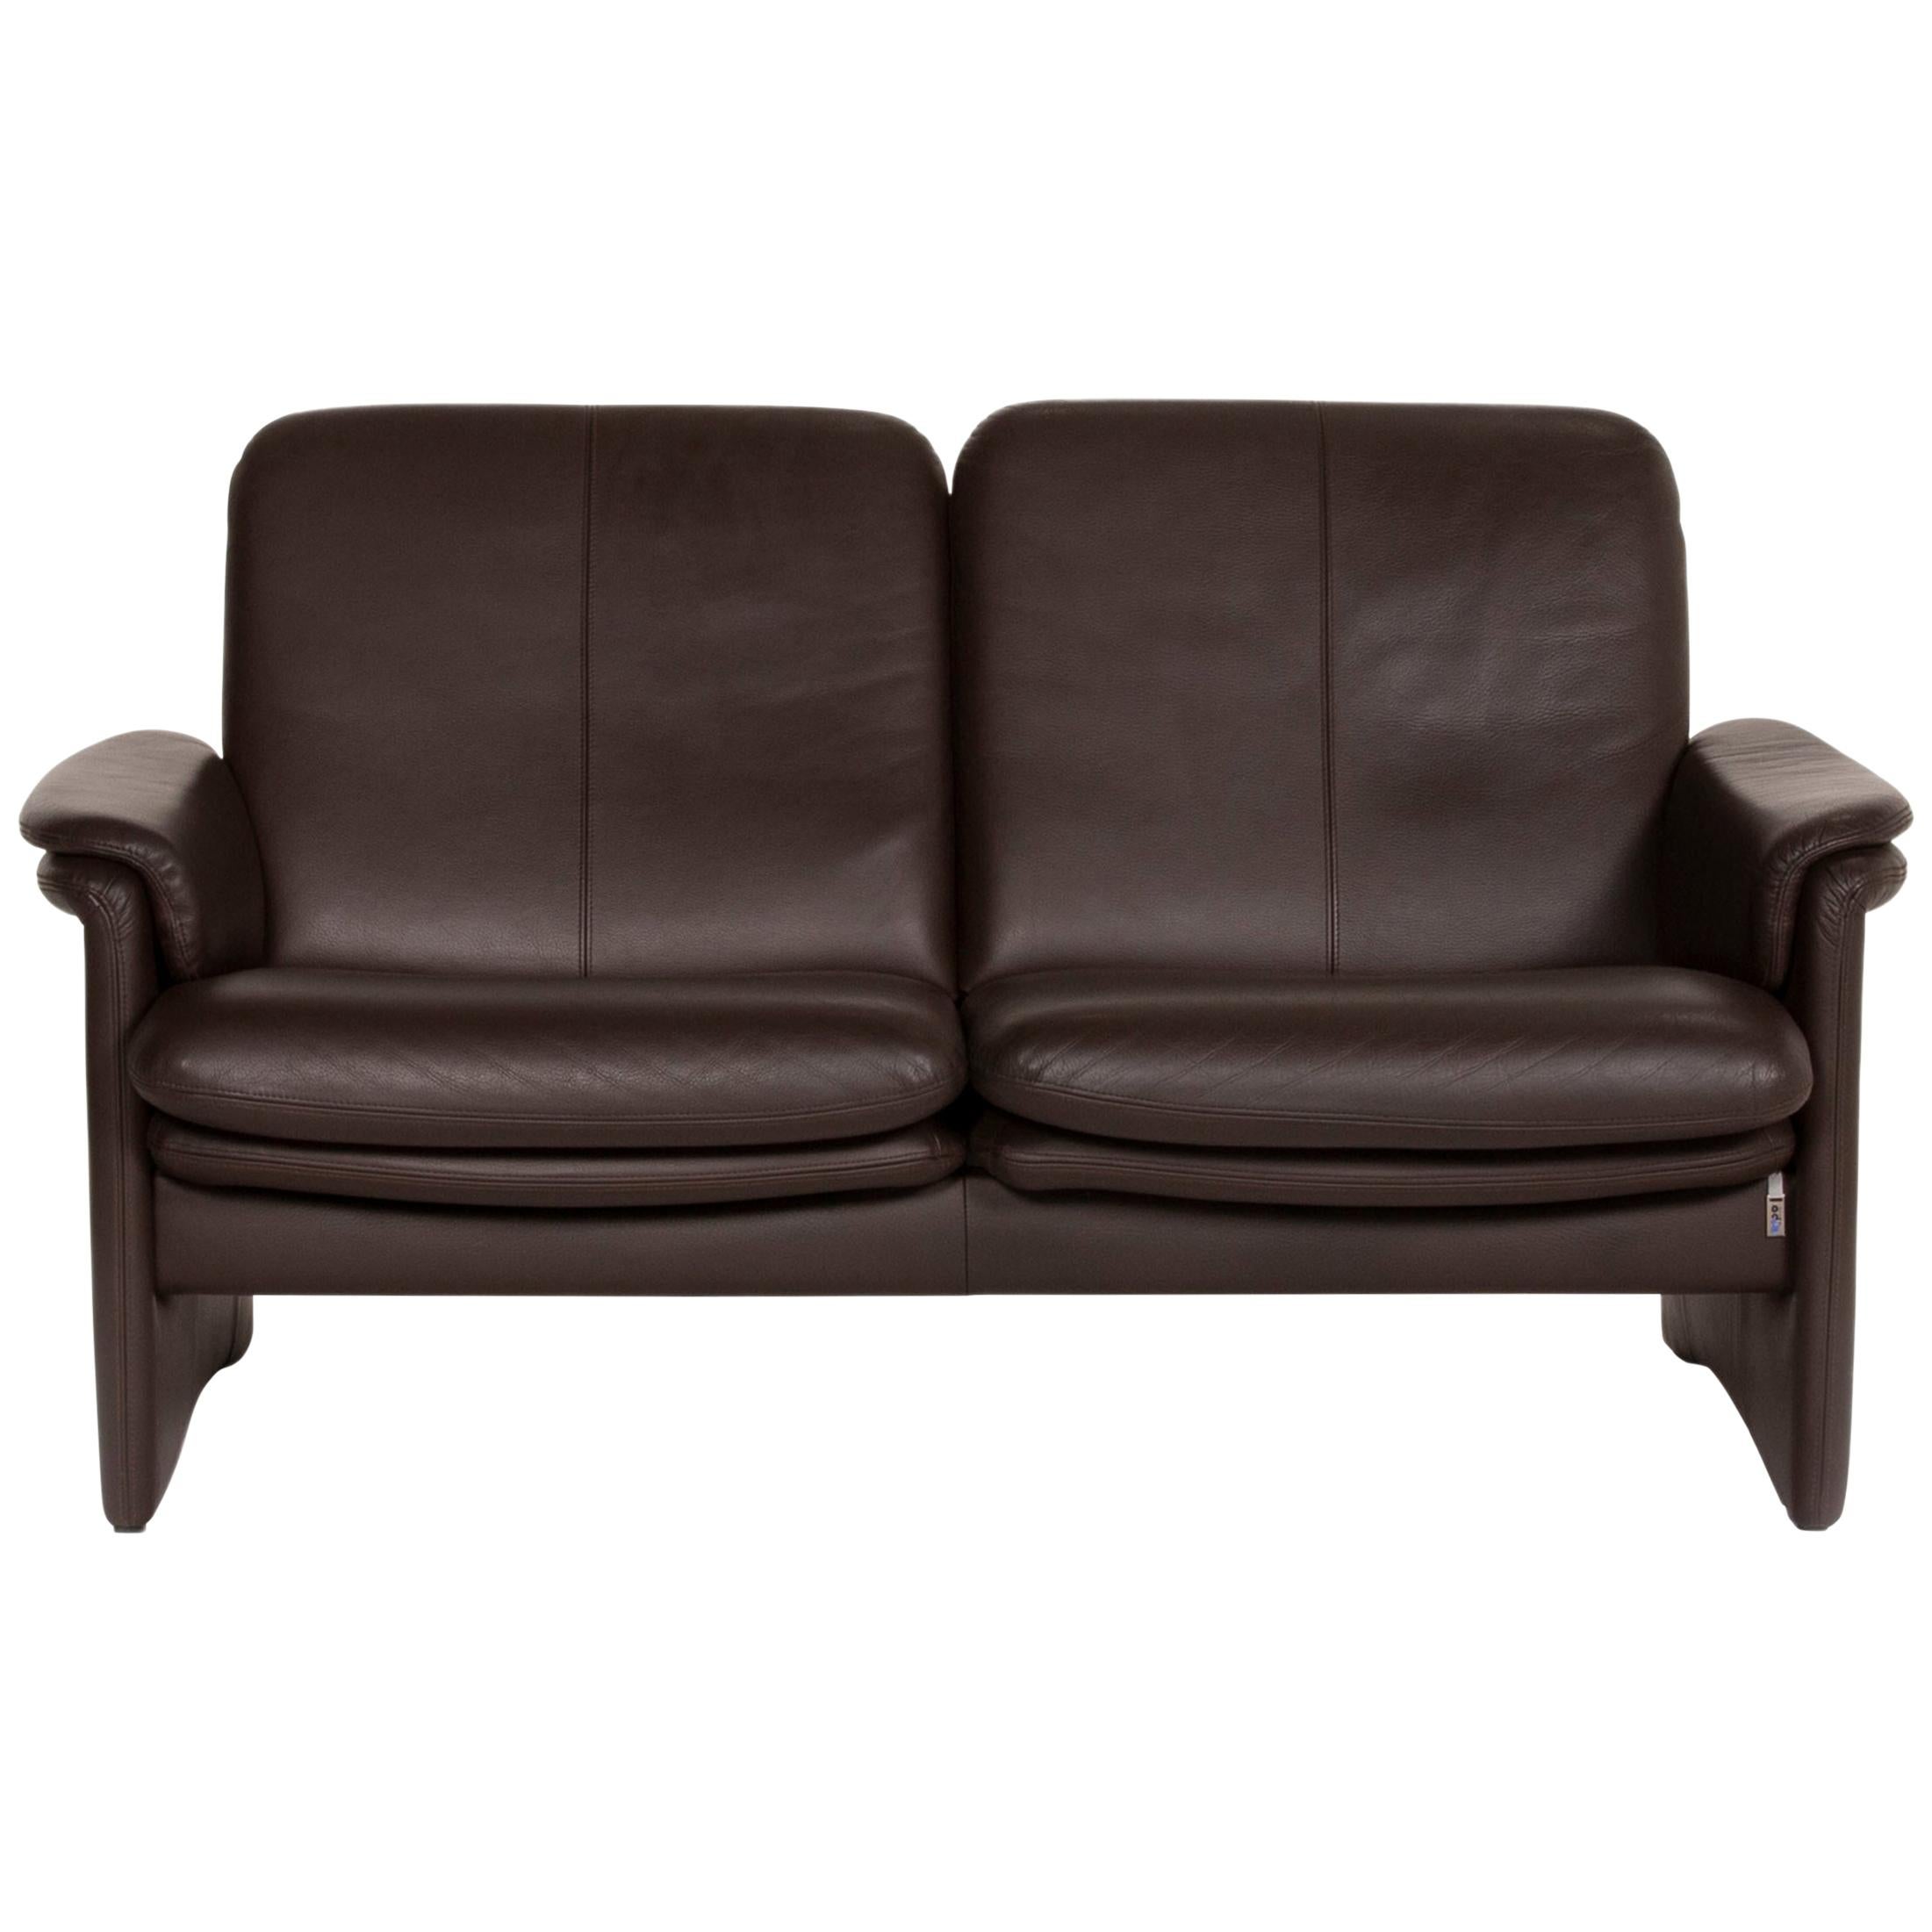 Erpo City Leather Sofa Brown Dark Brown Two-Seat Couch For Sale